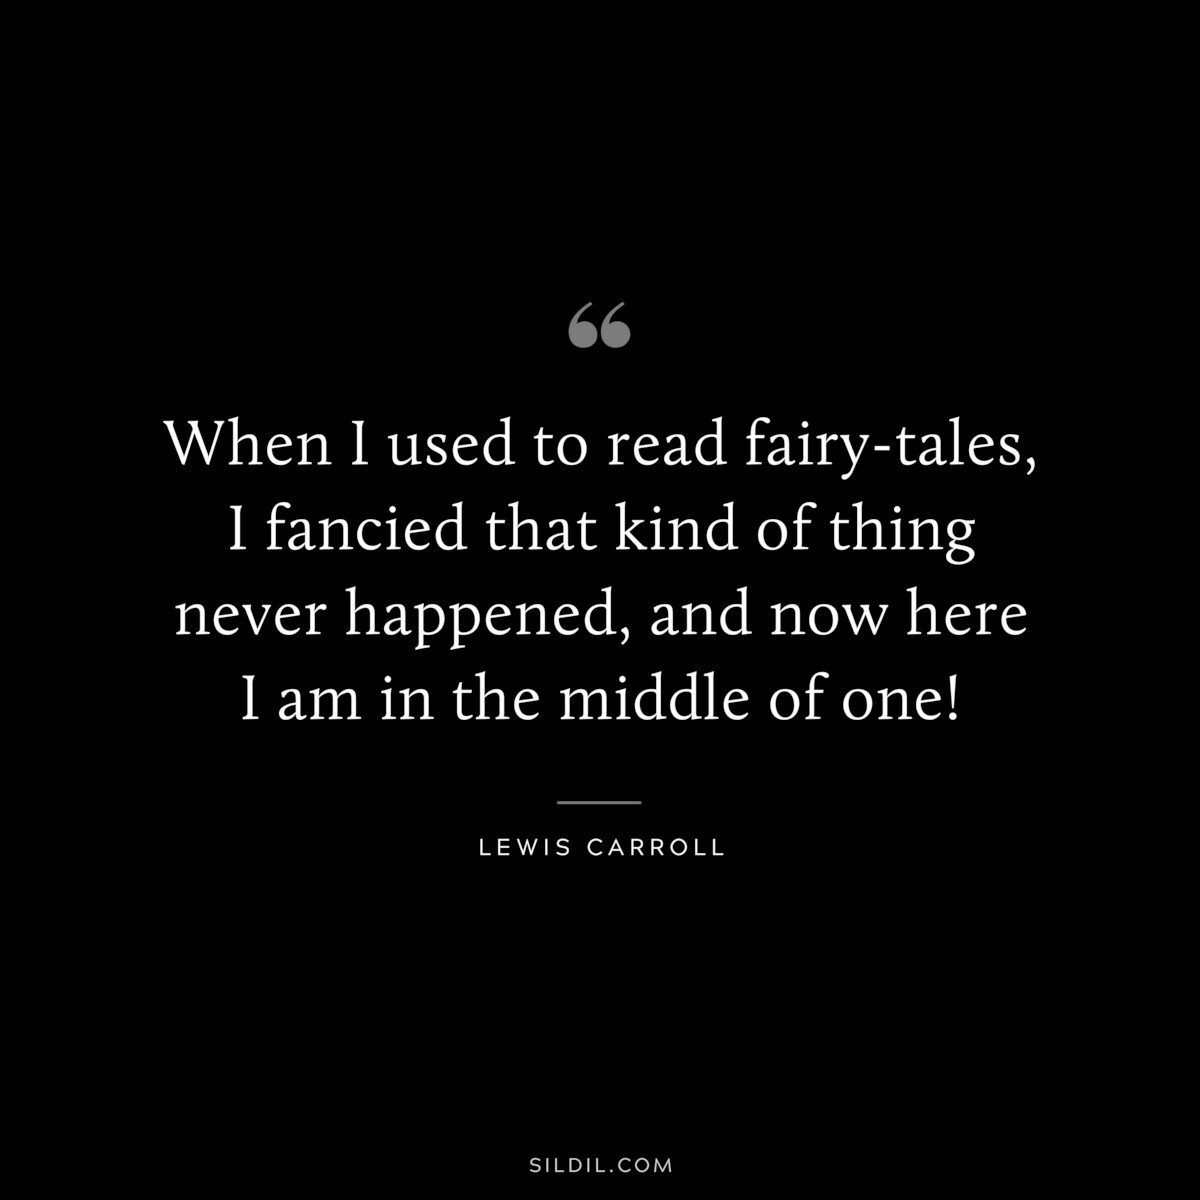 When I used to read fairy-tales, I fancied that kind of thing never happened, and now here I am in the middle of one!